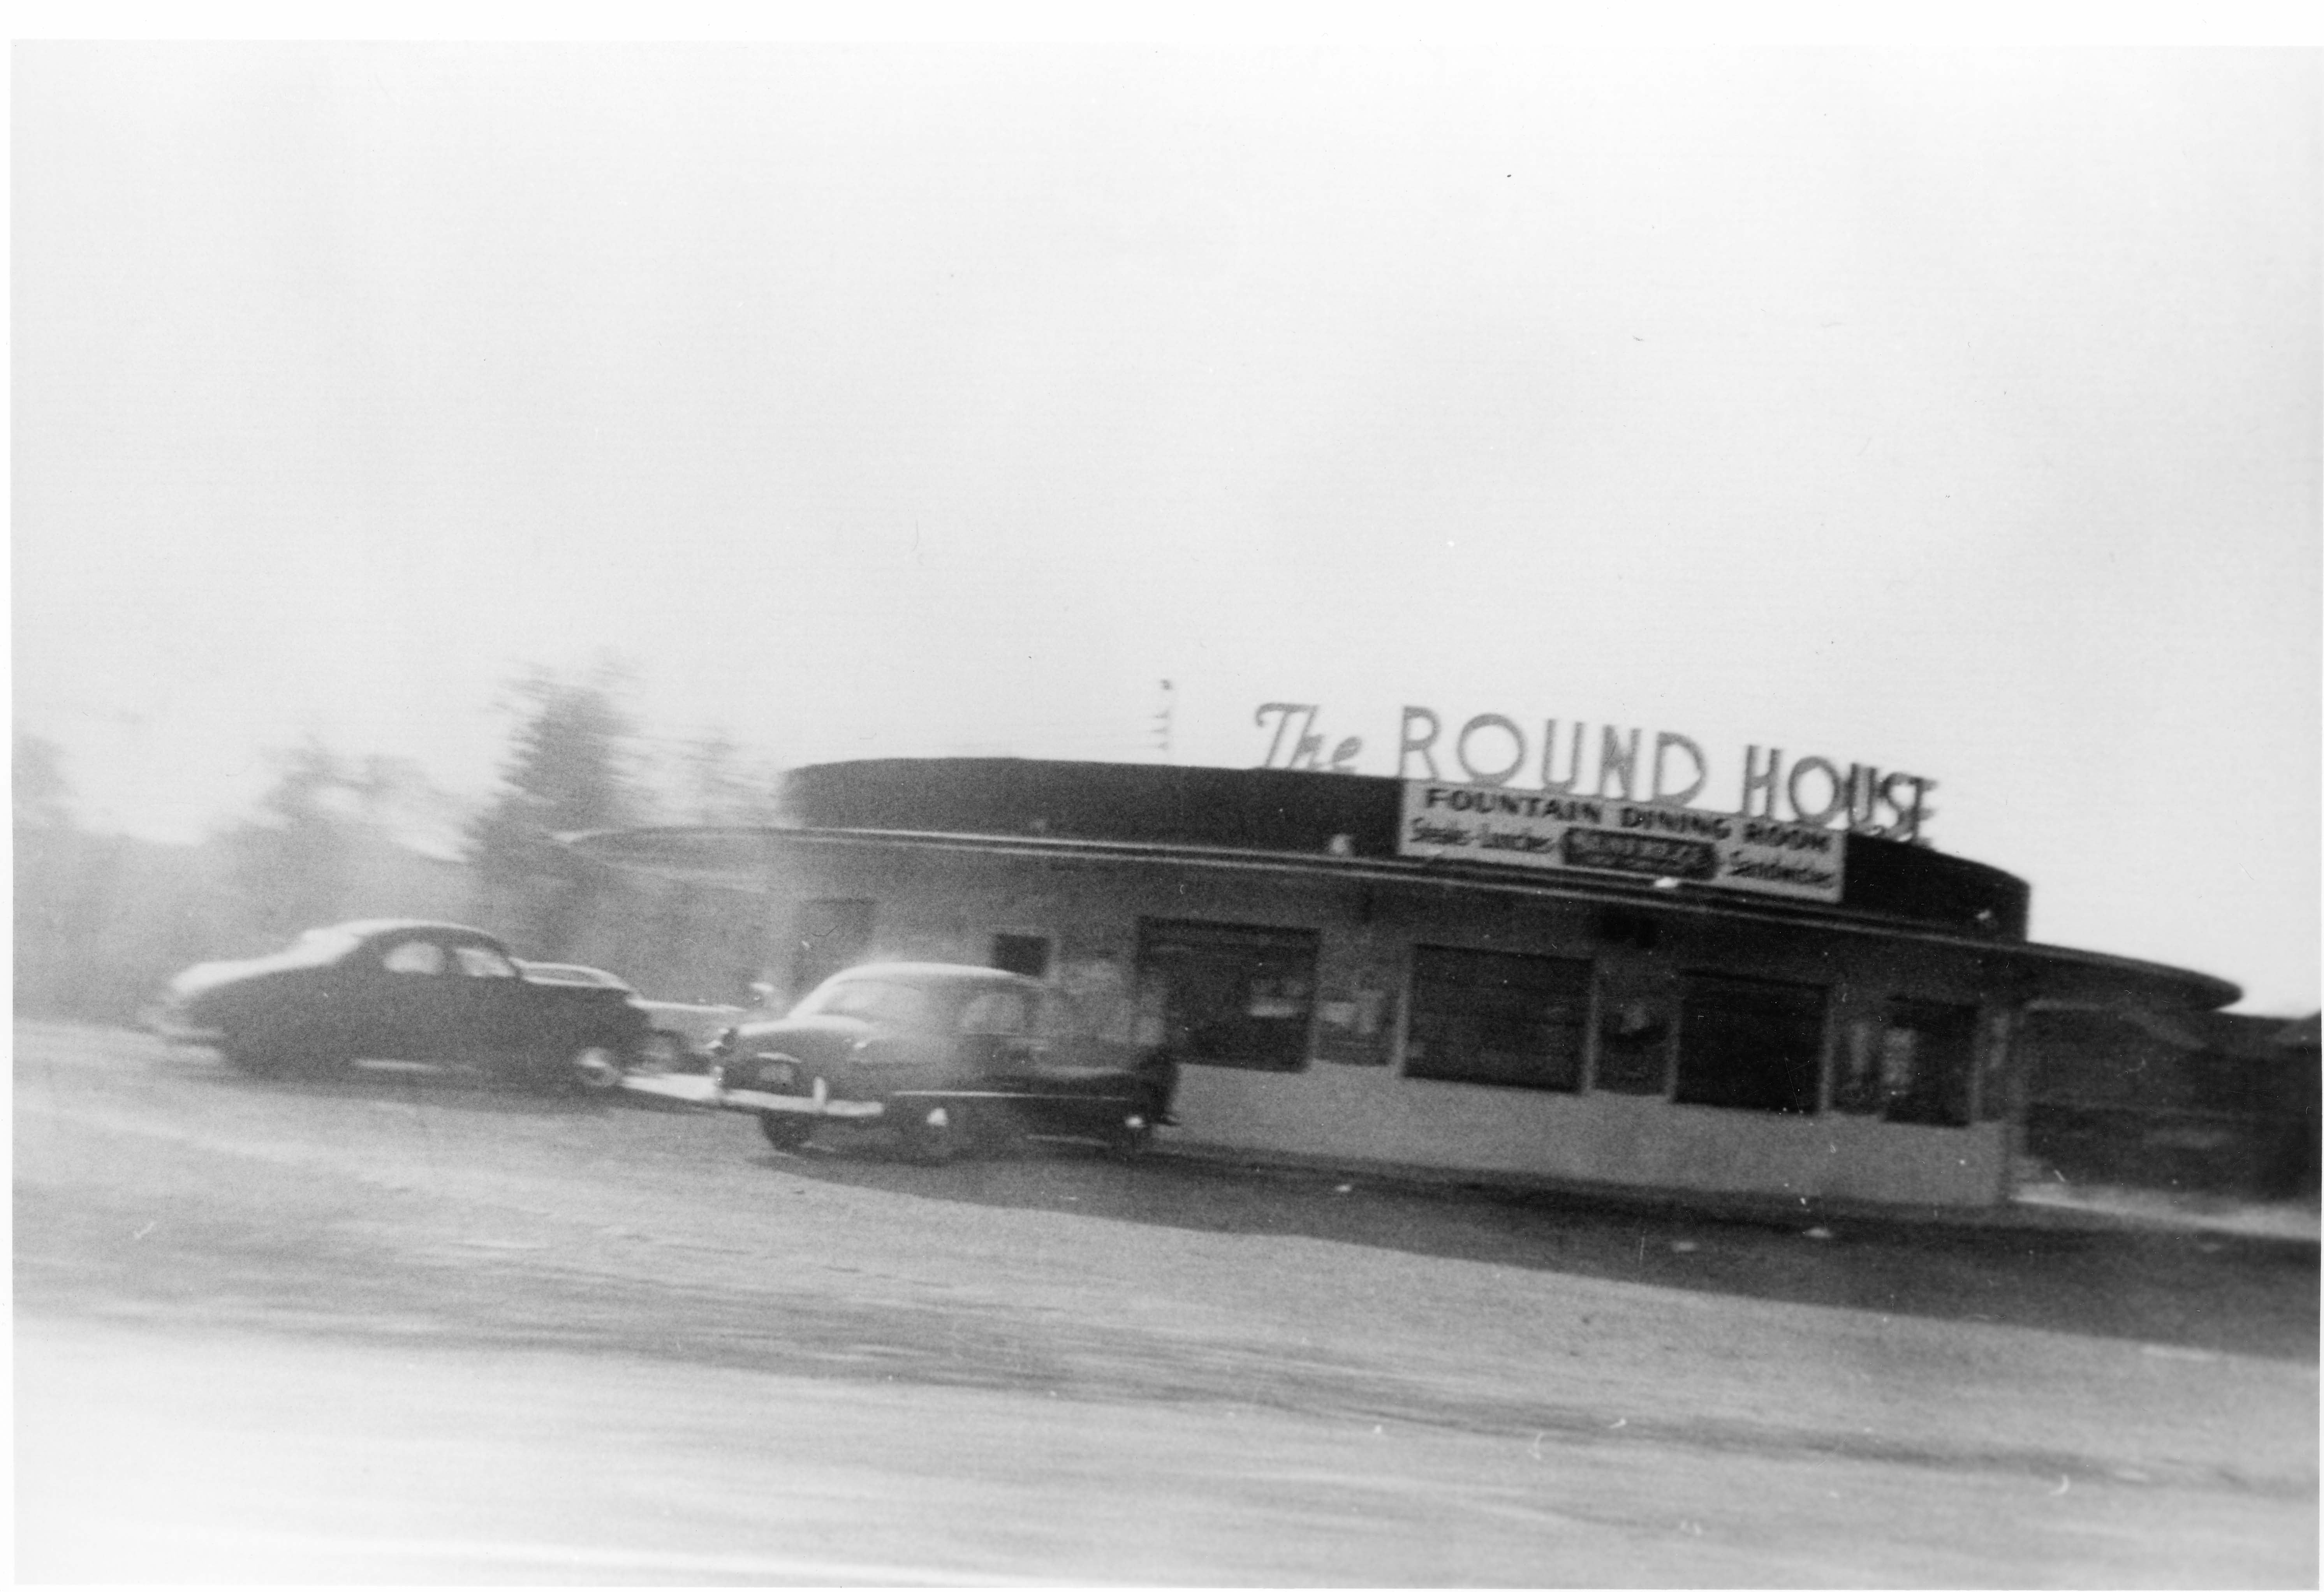 Round House restaurant from 1952 with vintage cars